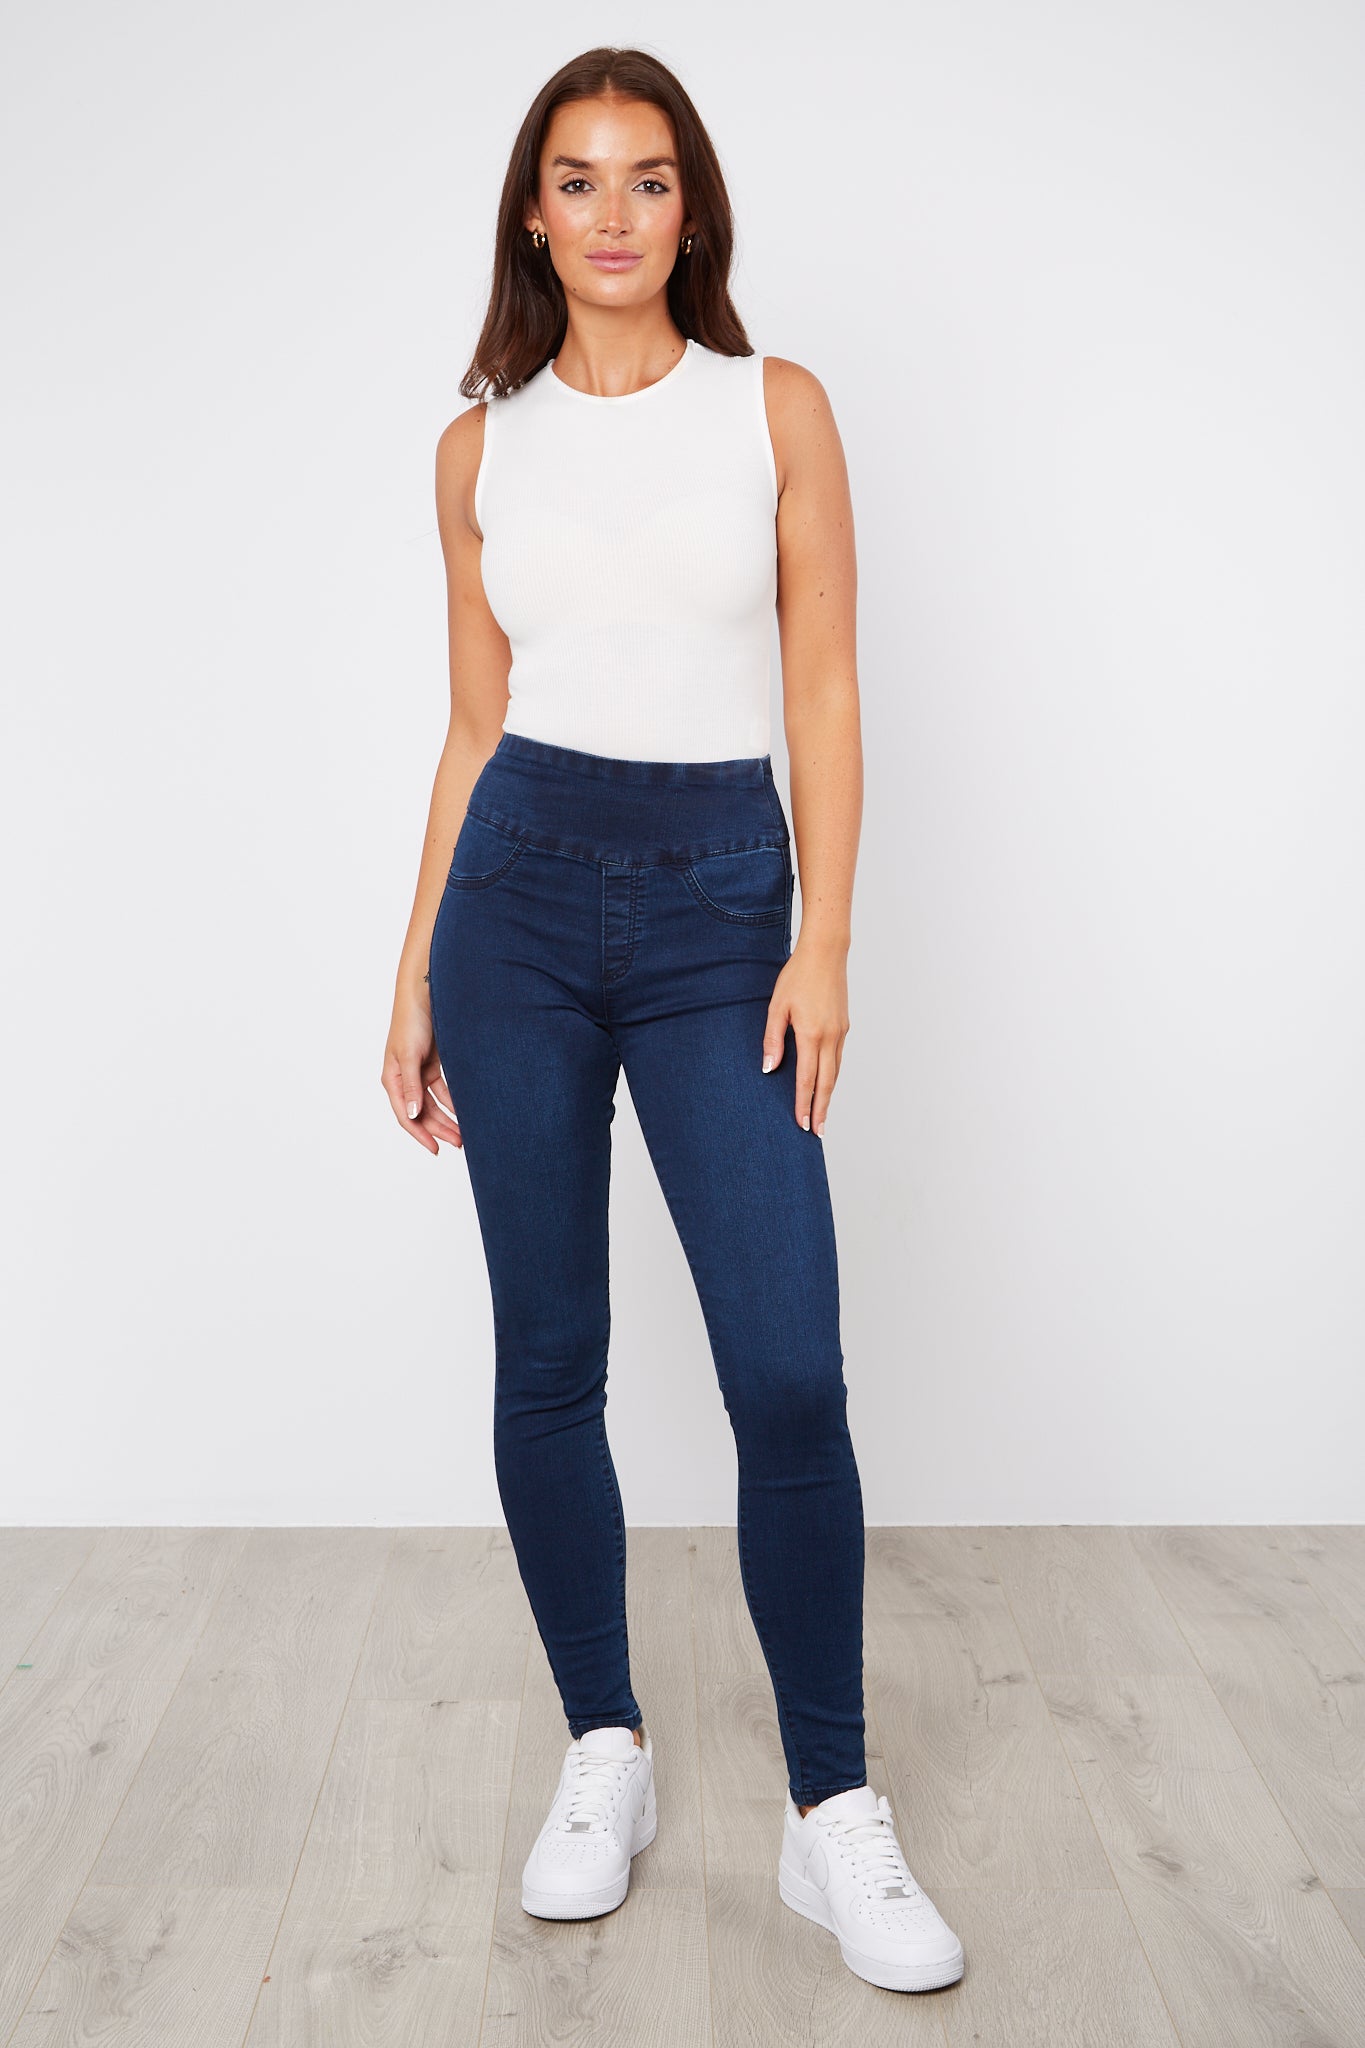 DYLAN PULL ON STRETCH JEAN - NAVY